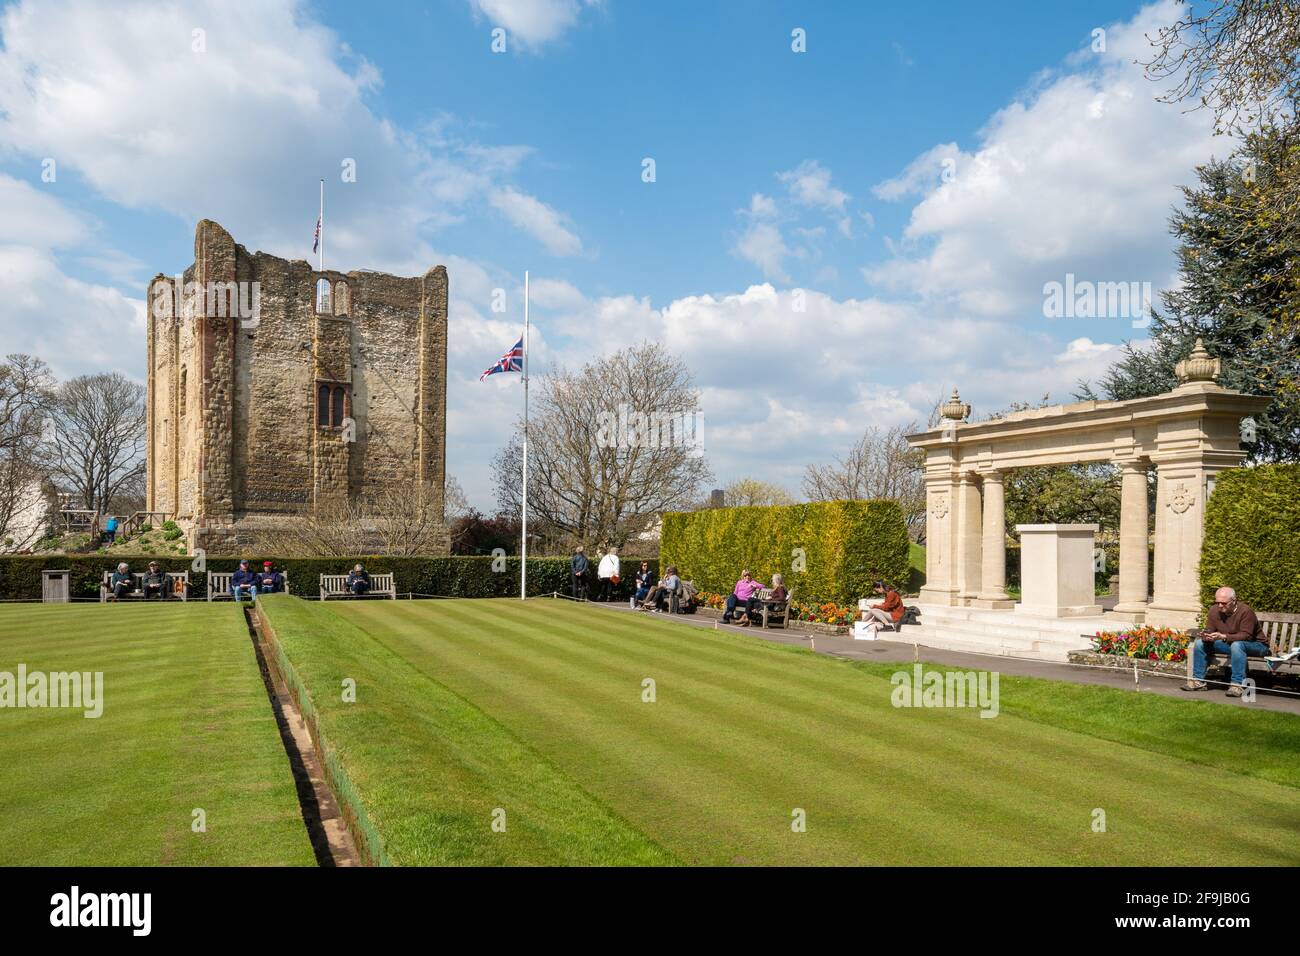 Guildford Castle grounds with people enjoying a warm spring day by the bowling green and war memorial  Surrey, England, UK Stock Photo